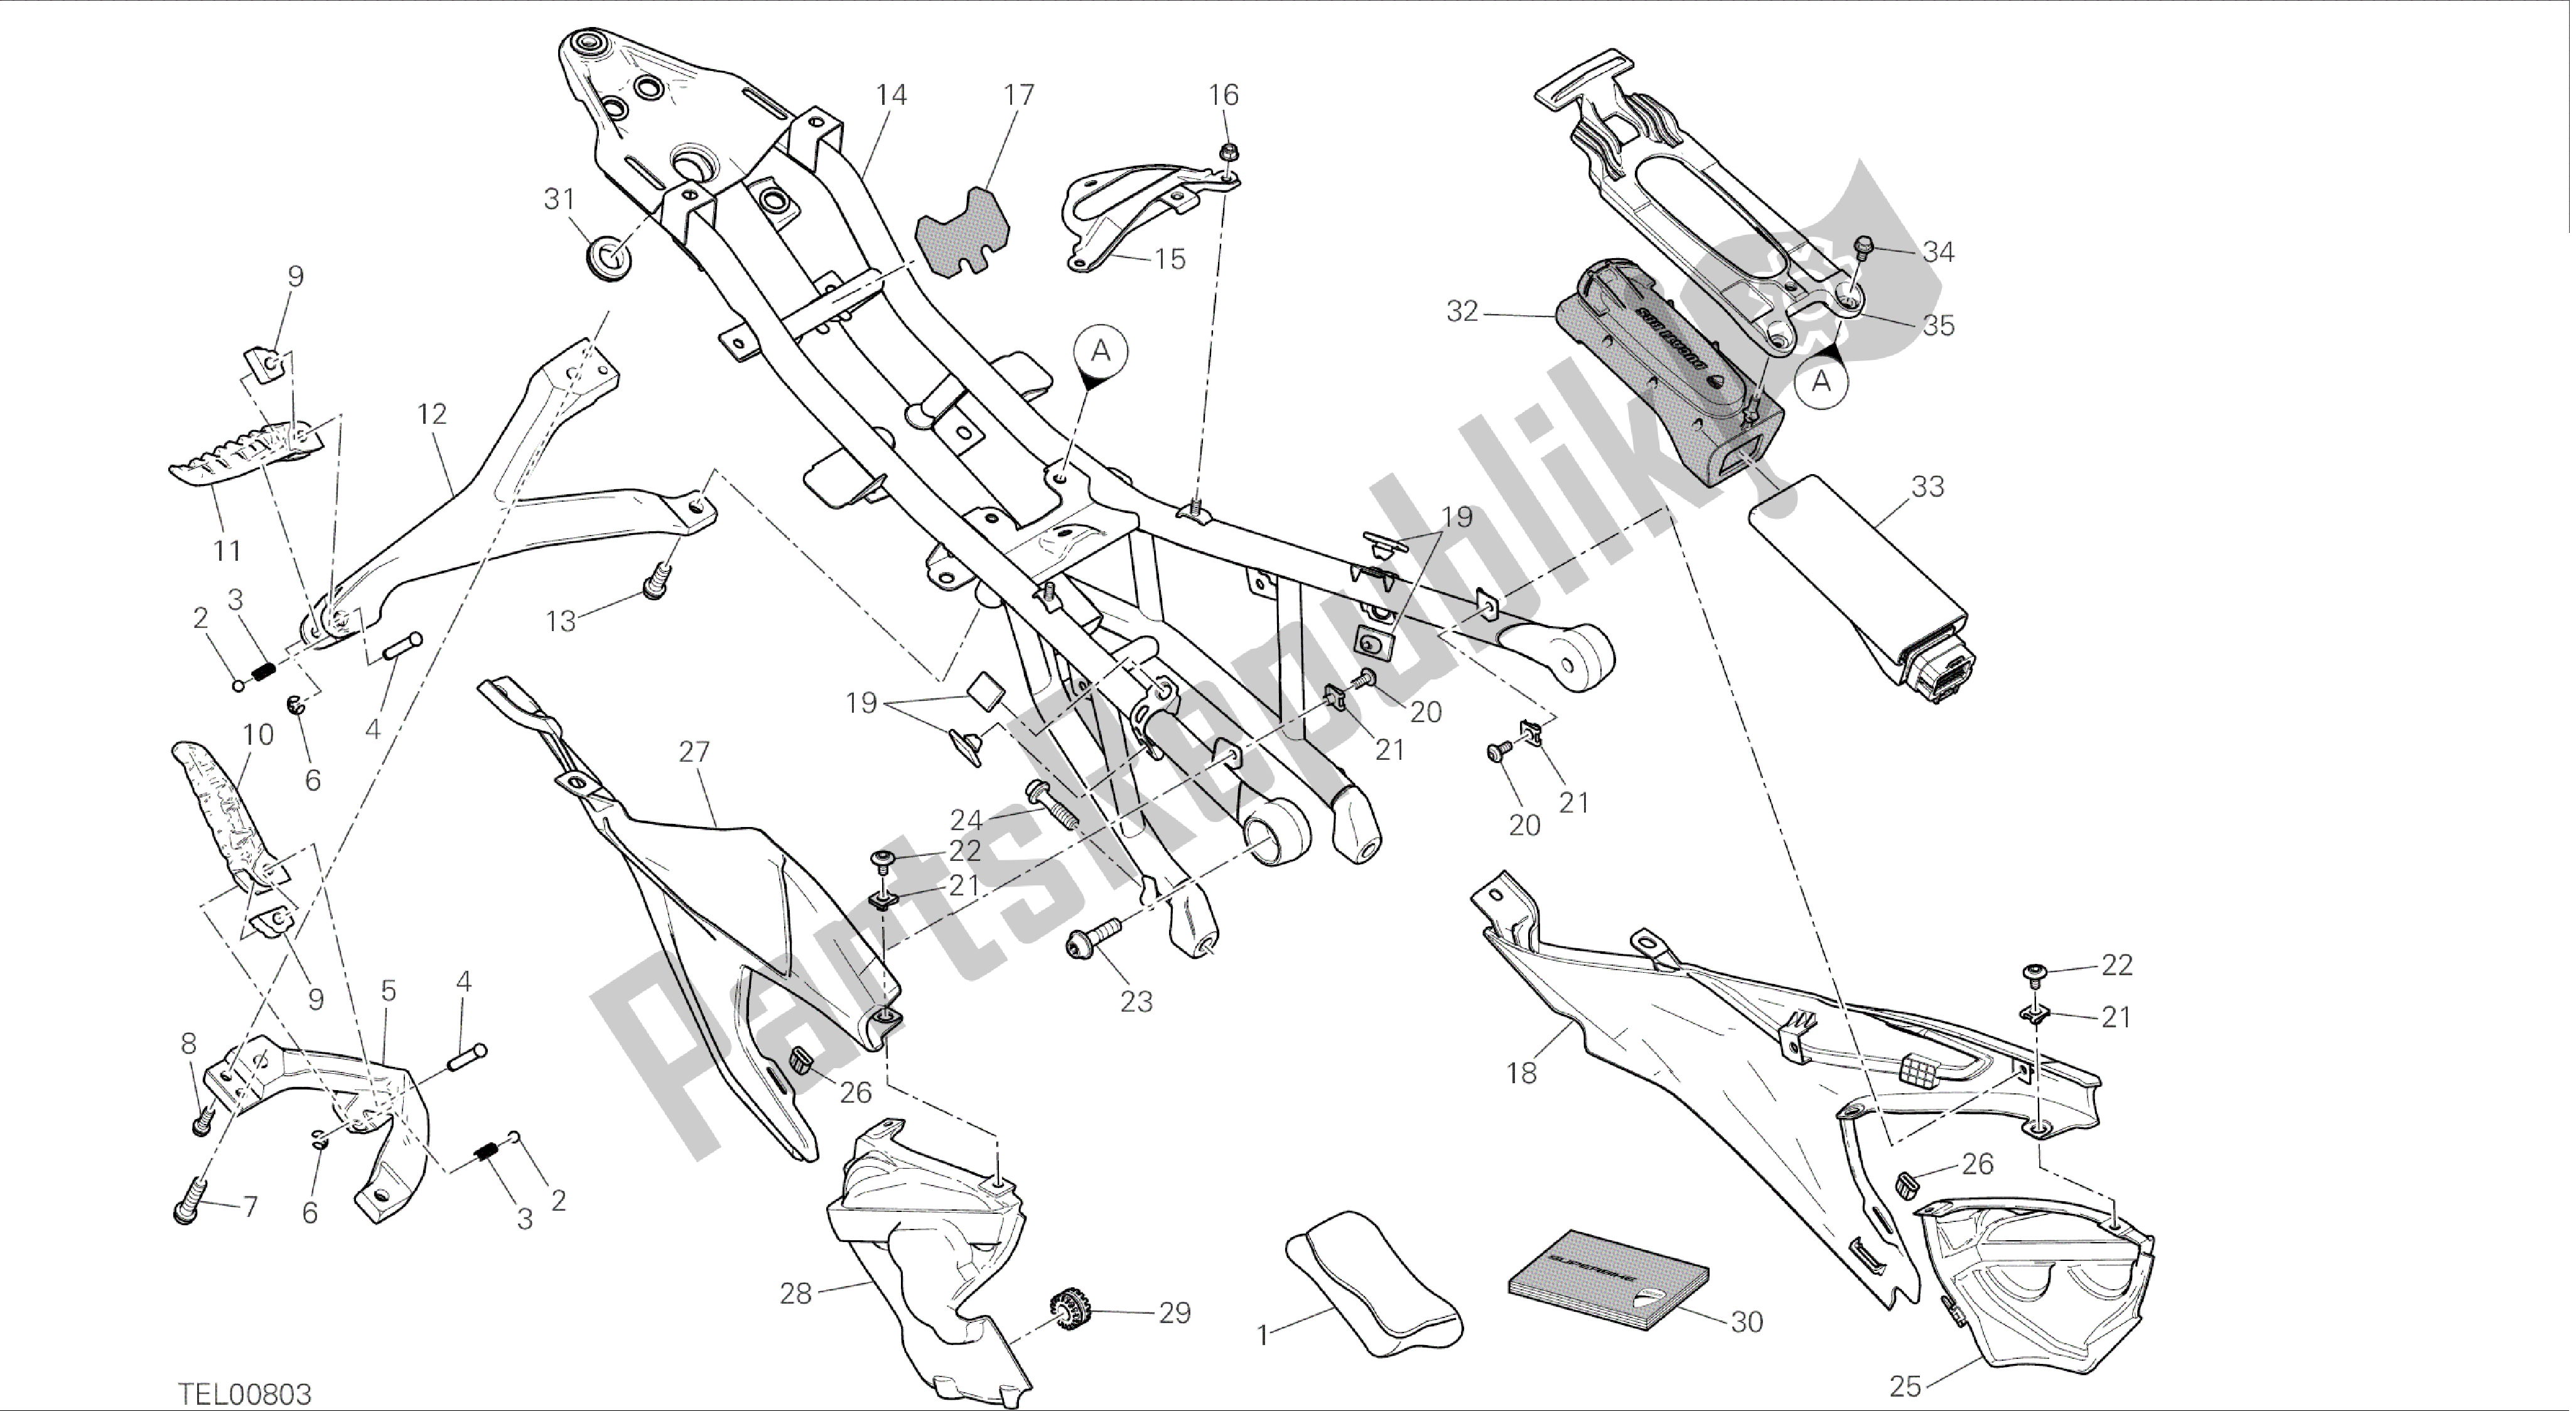 All parts for the Drawing 027 - Rear Frame Comp. [mod:899 Abs;xst:aus,eur,fra,jap,twn]group Frame of the Ducati Panigale 899 2014